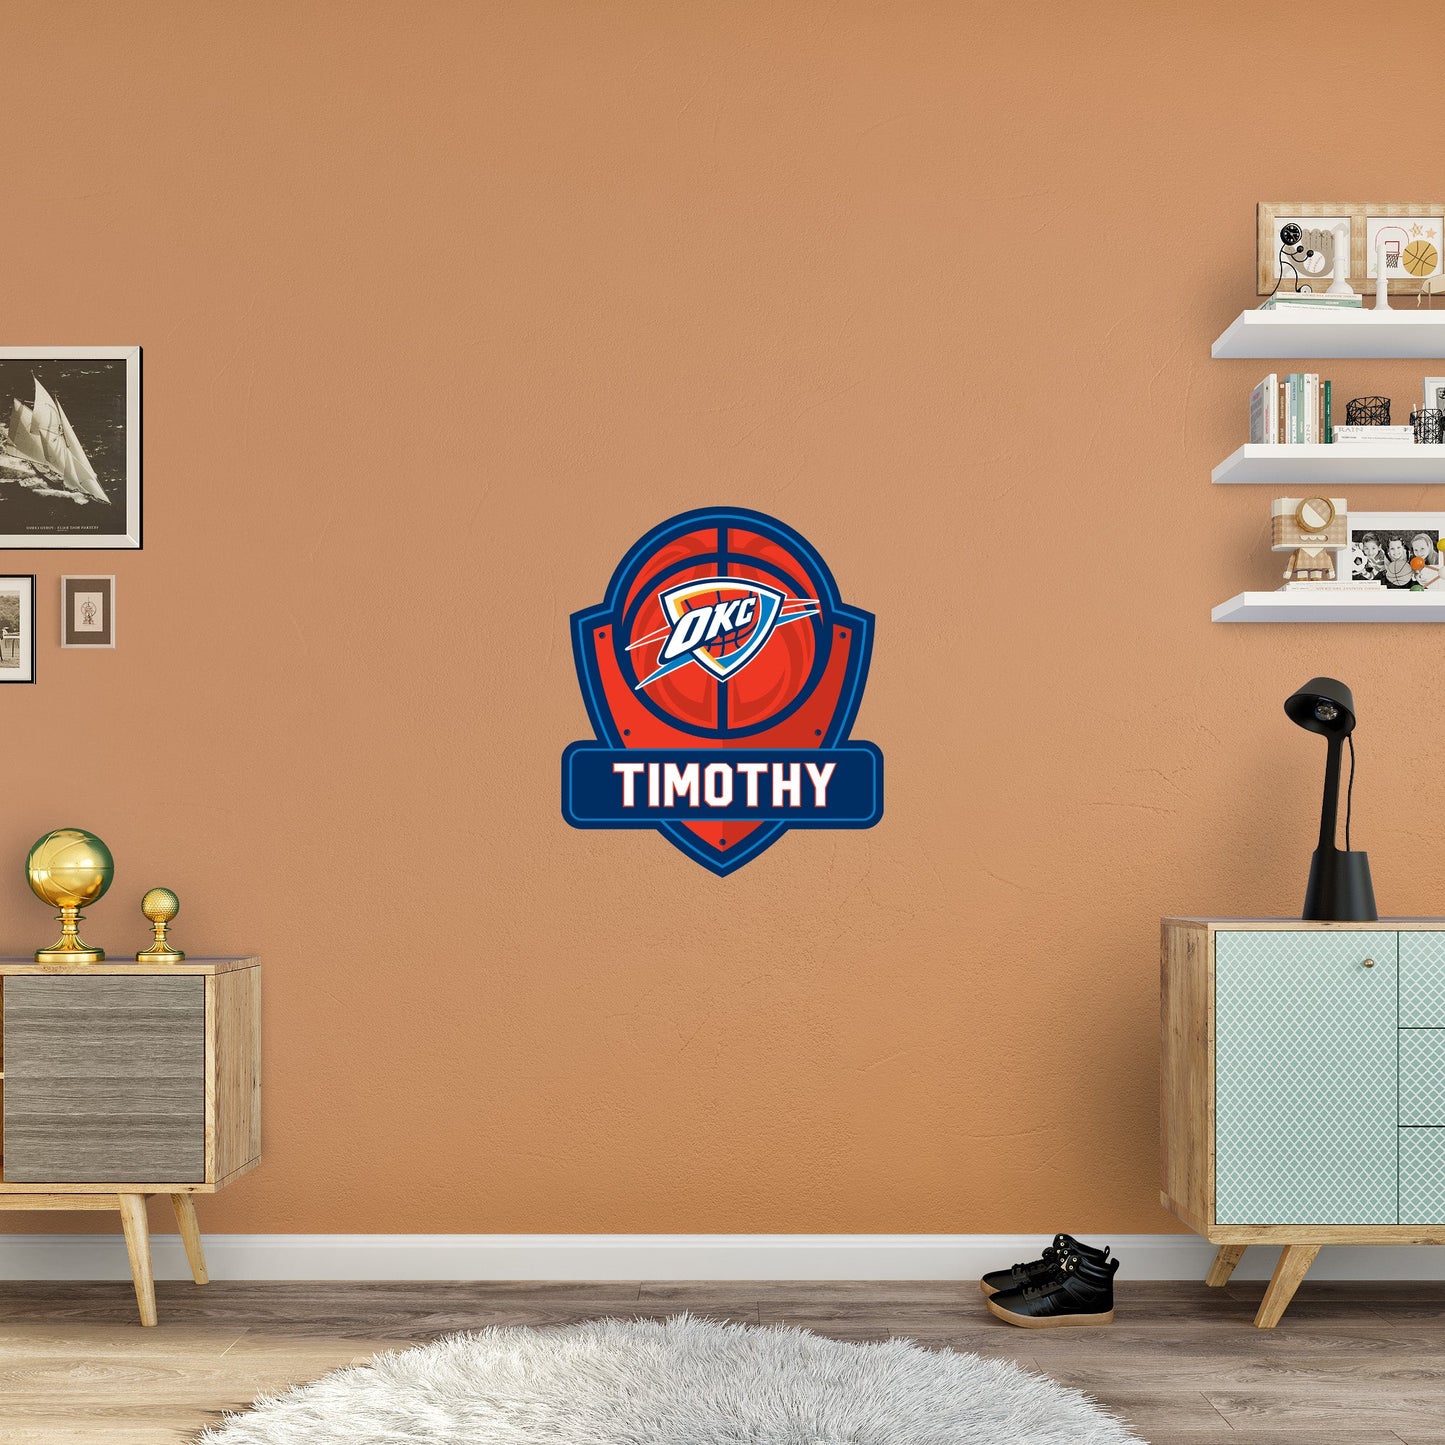 Oklahoma City Thunder: Badge Personalized Name - Officially Licensed NBA Removable Adhesive Decal